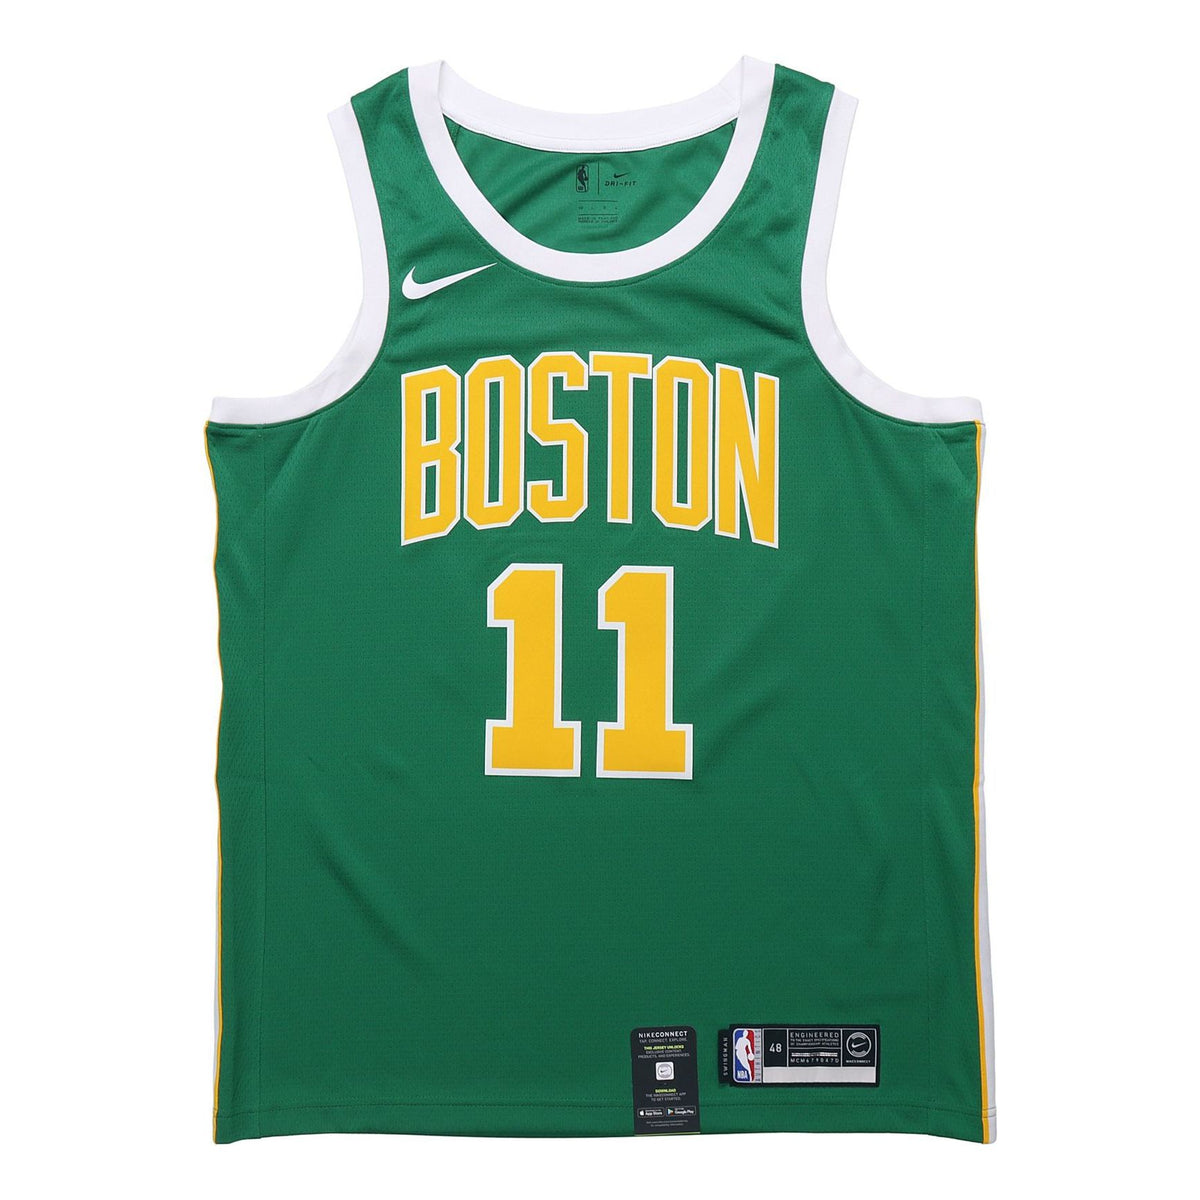 NBA_ Stitched Basketball 7 Kevin Durant Jersey 11 Kyrie Irving